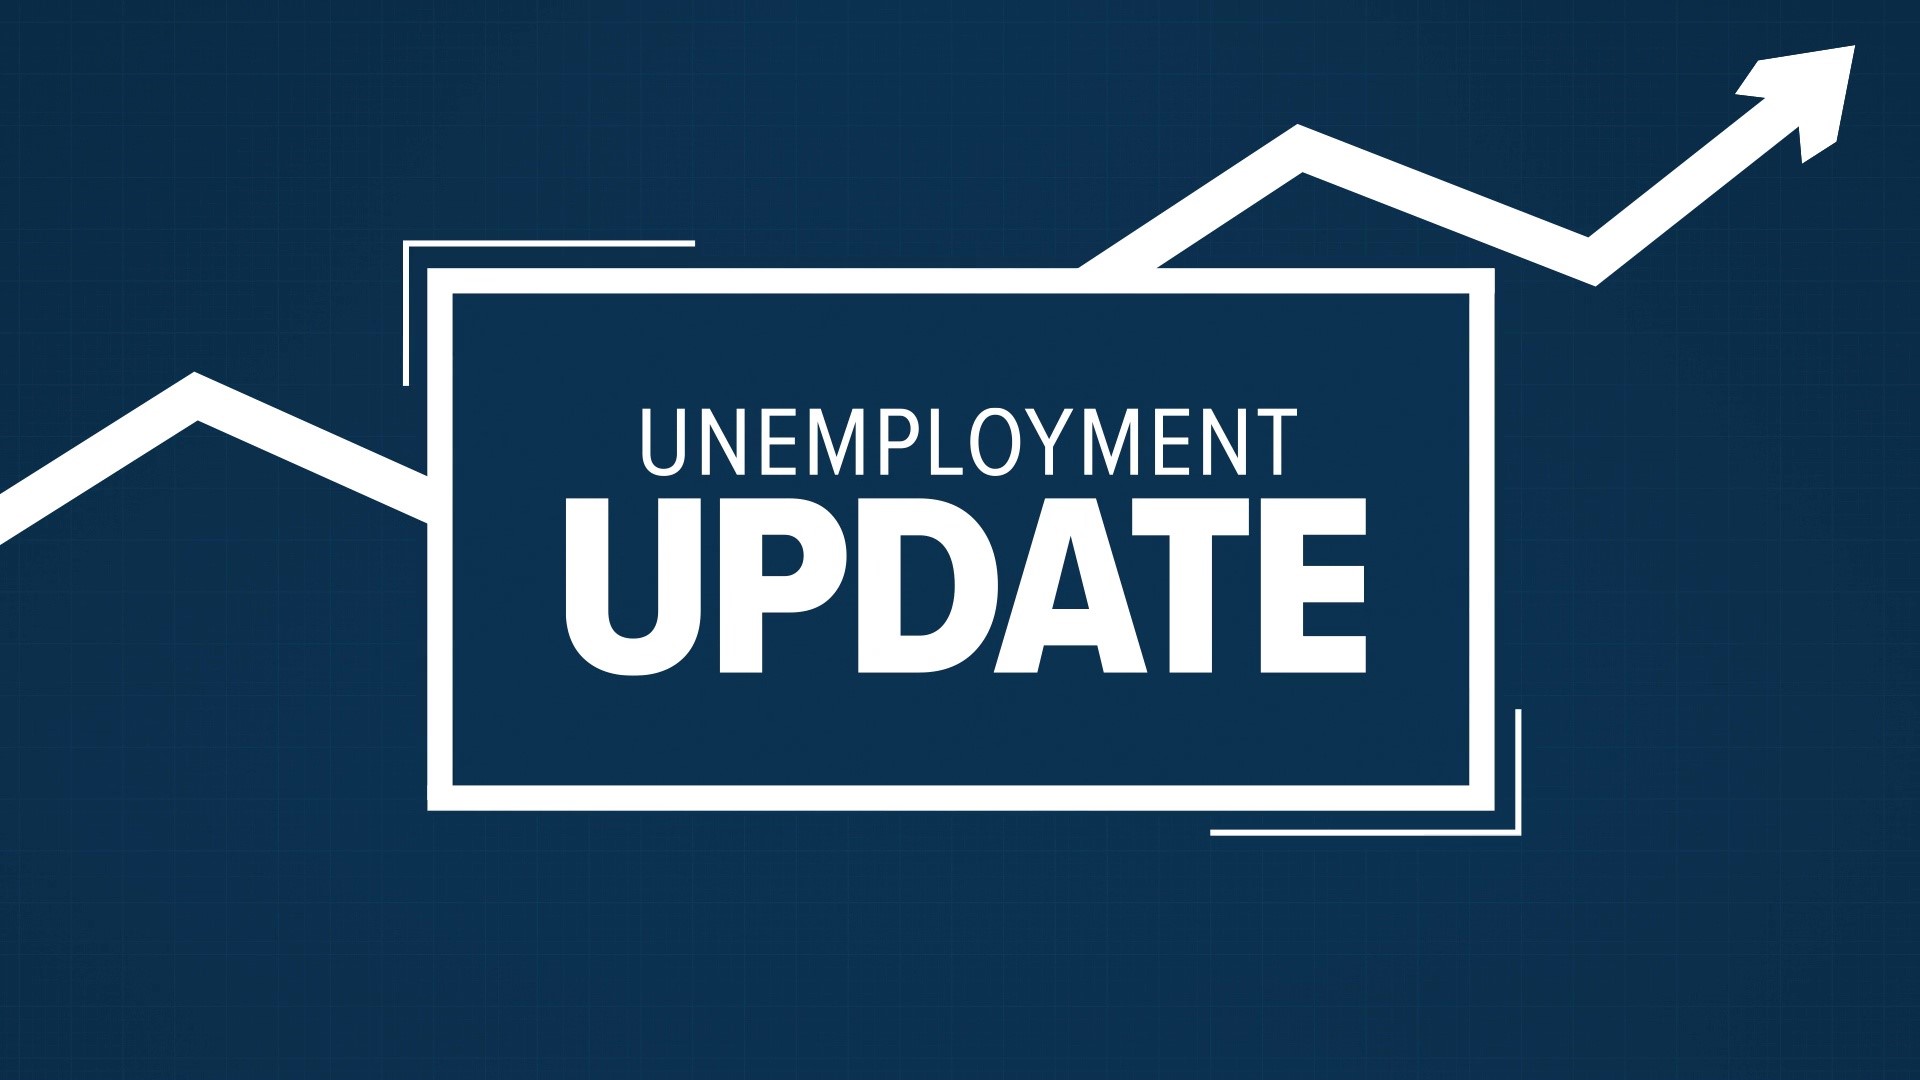 $20,169,684.43 in unemployment insurance benefits were paid out last week.